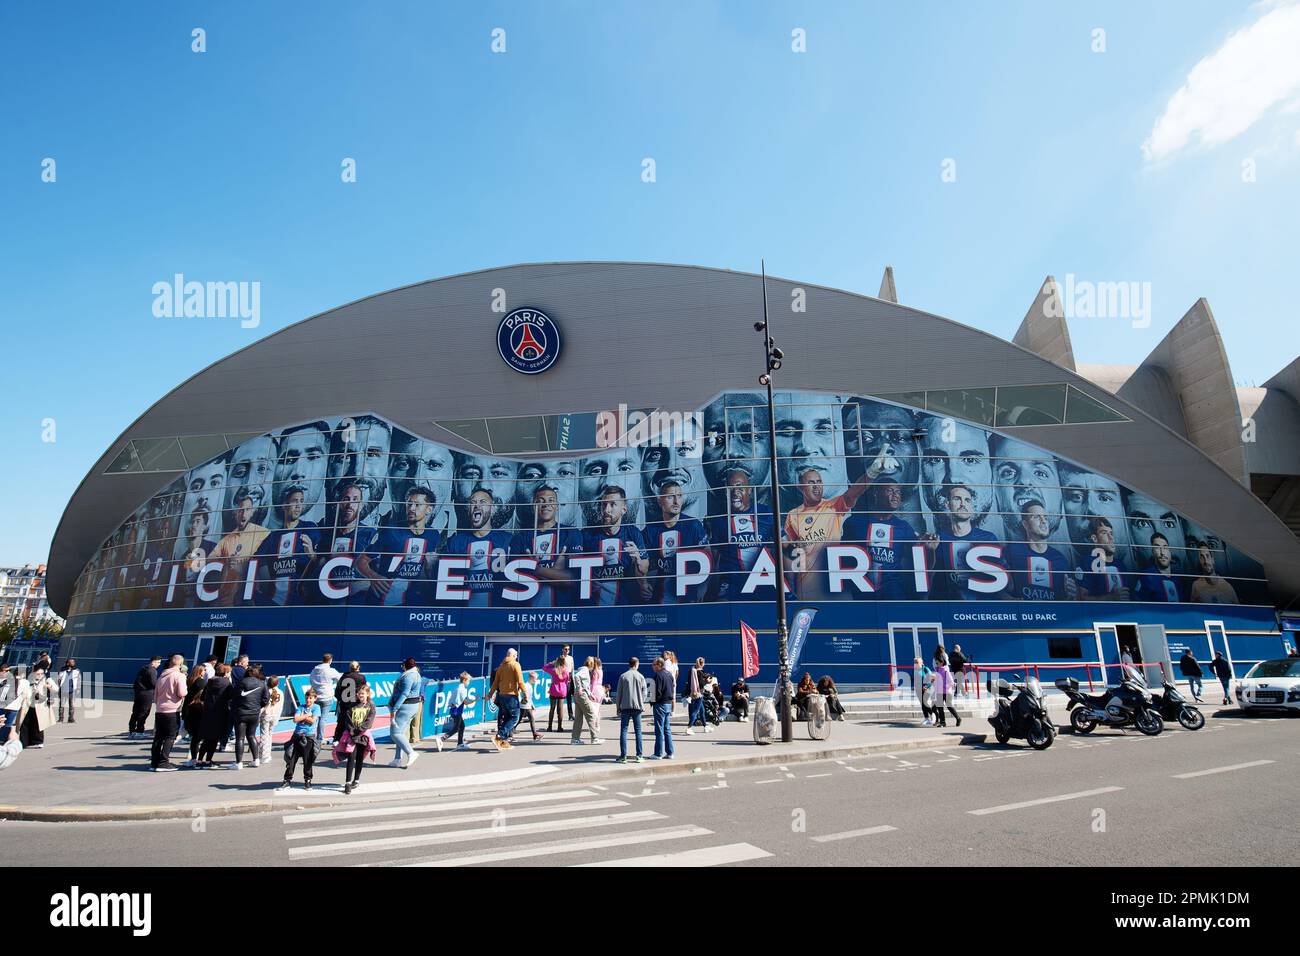 Whole PSG team on the main entrance of the Parc des Princes stadium, the home pitch of the French Ligue 1 football club Paris Saint-Germain Stock Photo